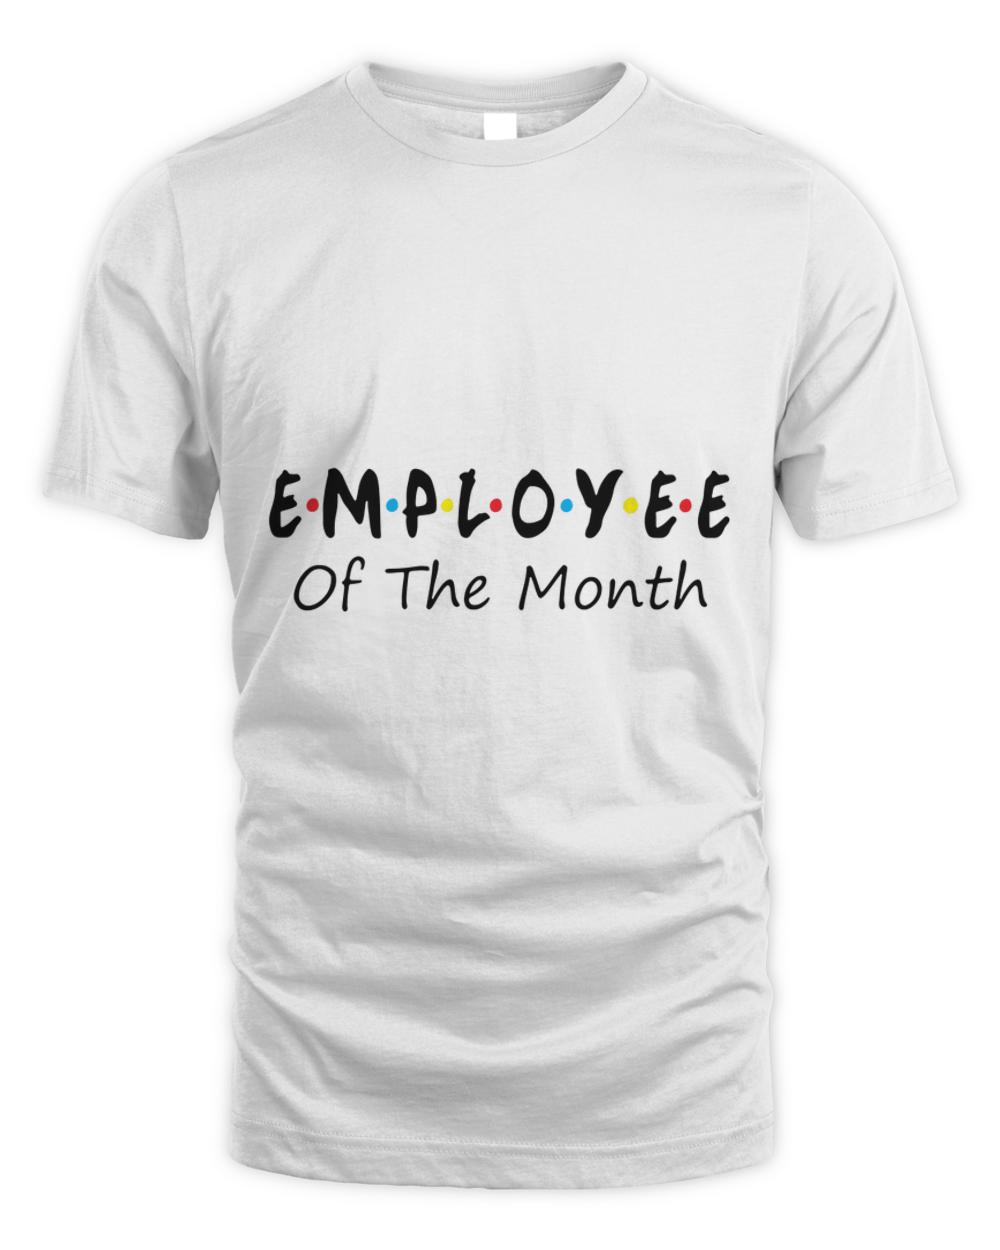 Employee Of The Month T-Shirt, Employee of the month T-Shirt